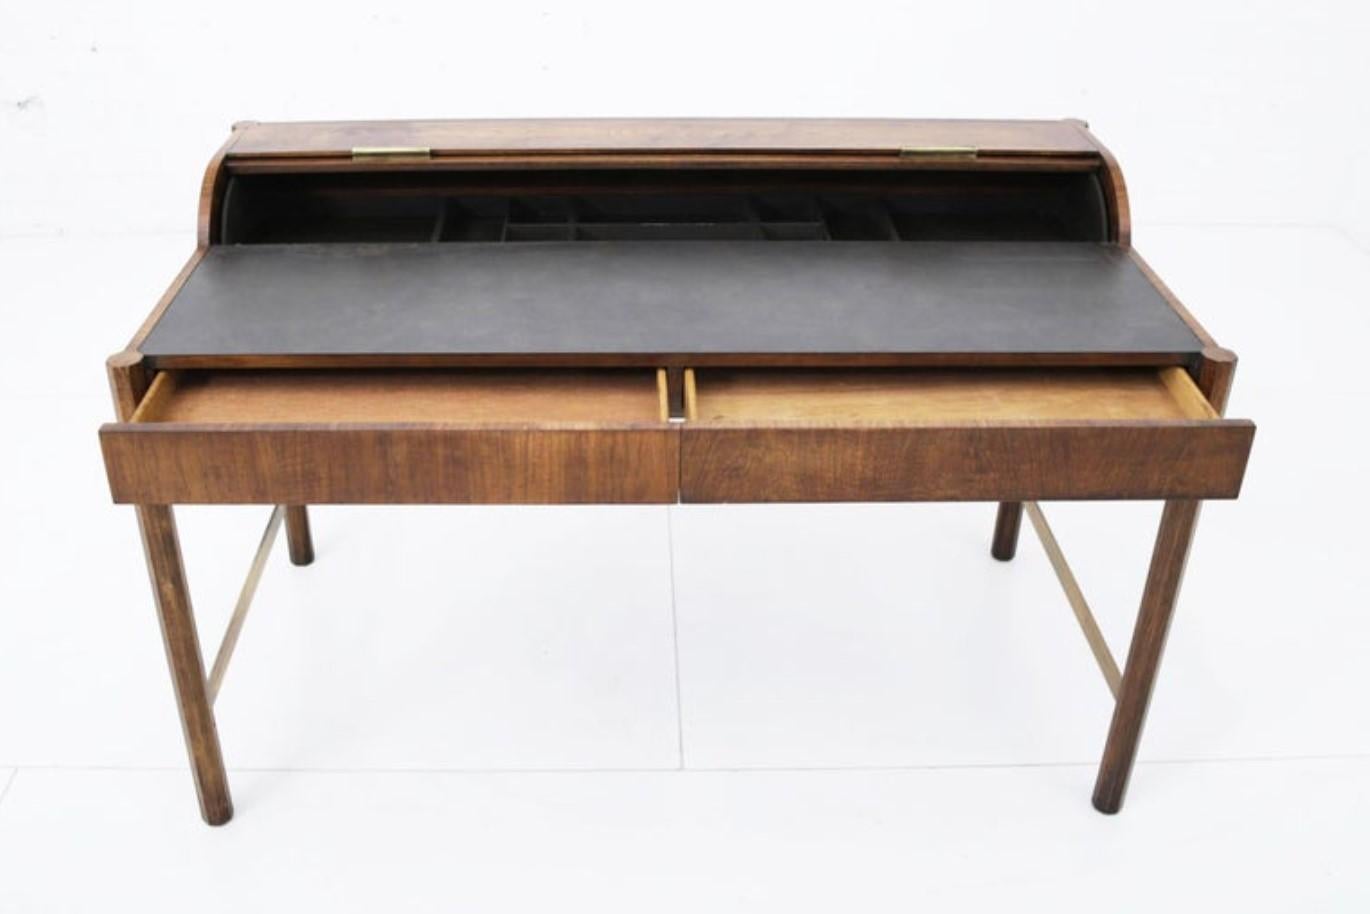 A unique vintage Mid-Century Modern roll top desk by the Hekman Furniture Company of Grand Rapids, Michigan. Hekman Furniture was funded in 1922 and become part of the Howard Miller Company in 1983.
The company is still in business but this desk